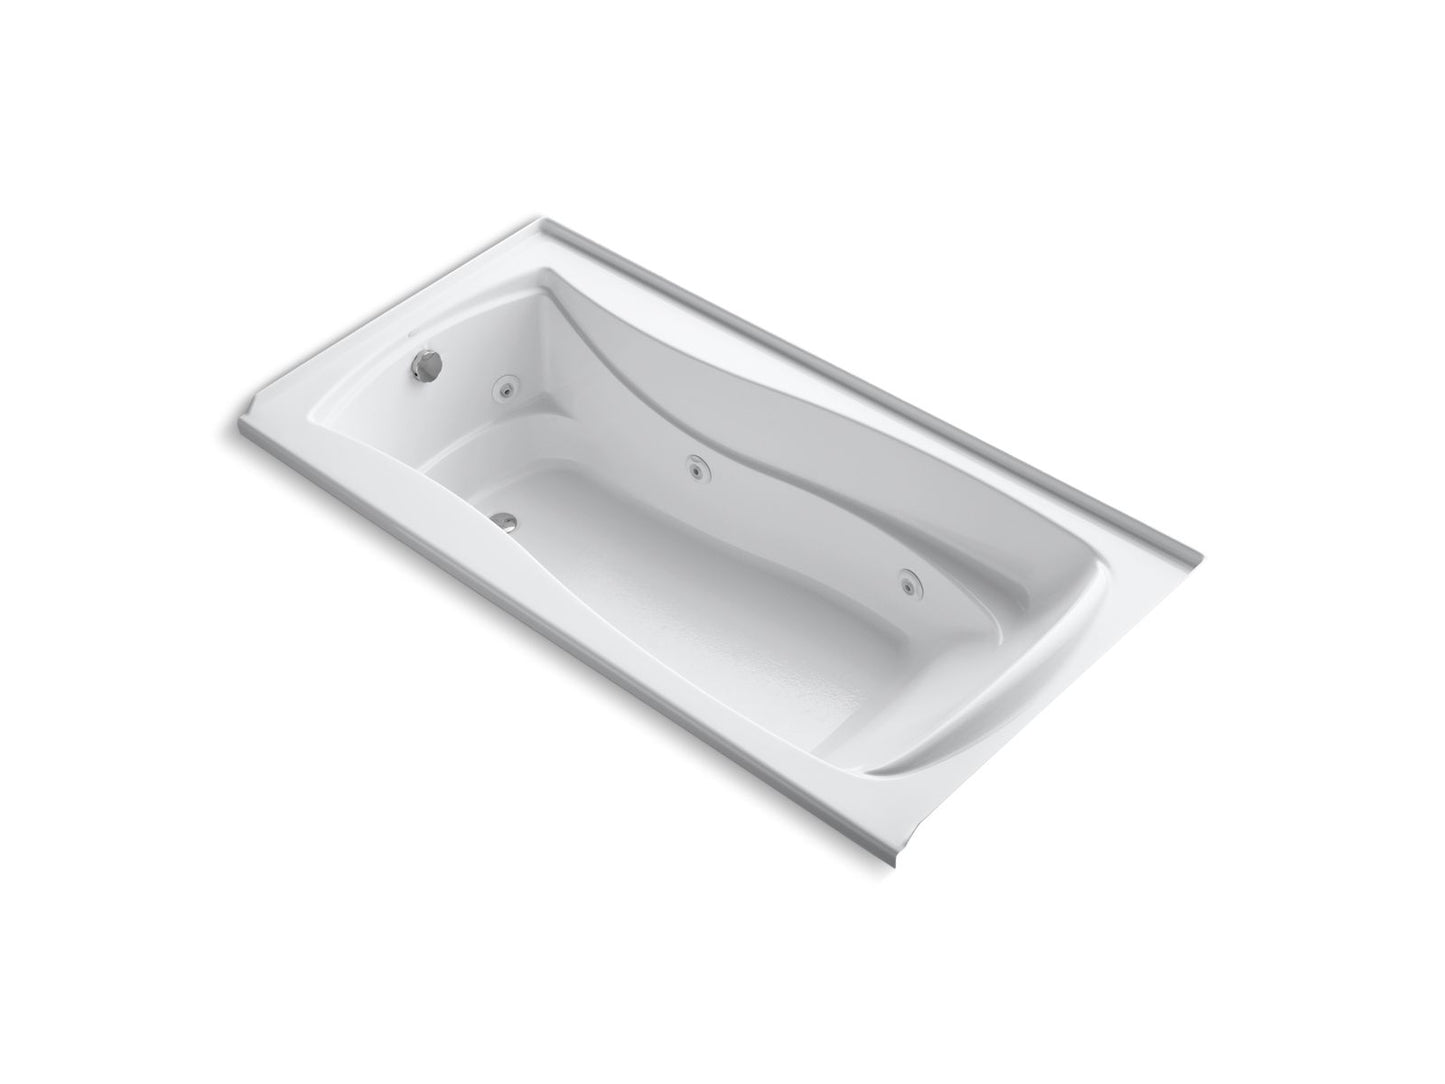 KOHLER K-1257-LW-0 Mariposa 72" X 36" Alcove Whirlpool Bath With Bask Heated Surface, Left Drain In White